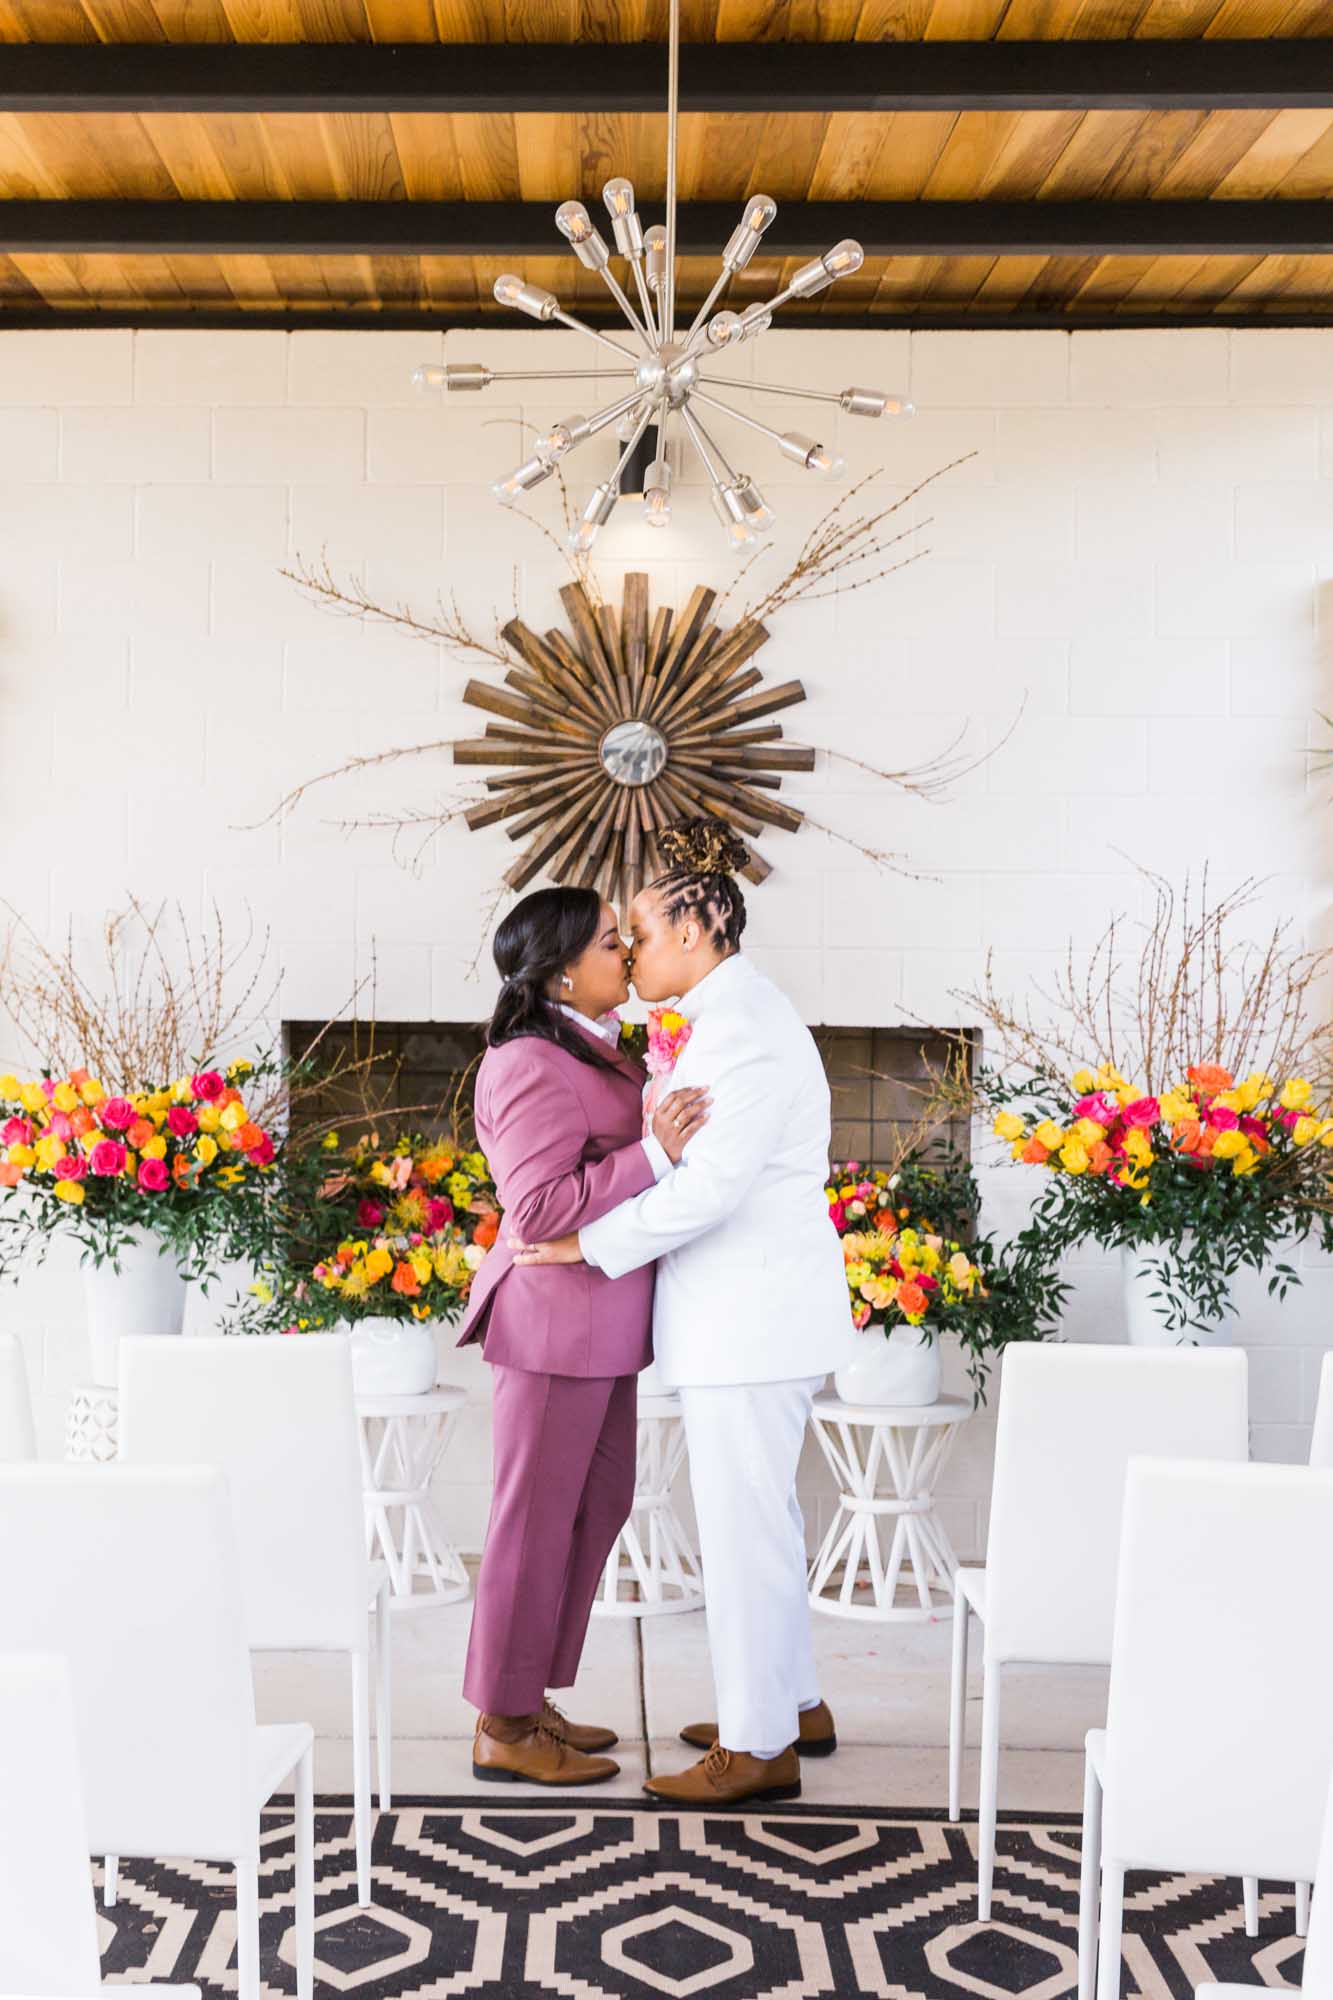 Bright and bold mid-century modern wedding ideas | Ashley LaPrade Photography | Featured on Equally Wed, the leading LGBTQ+ wedding magazine